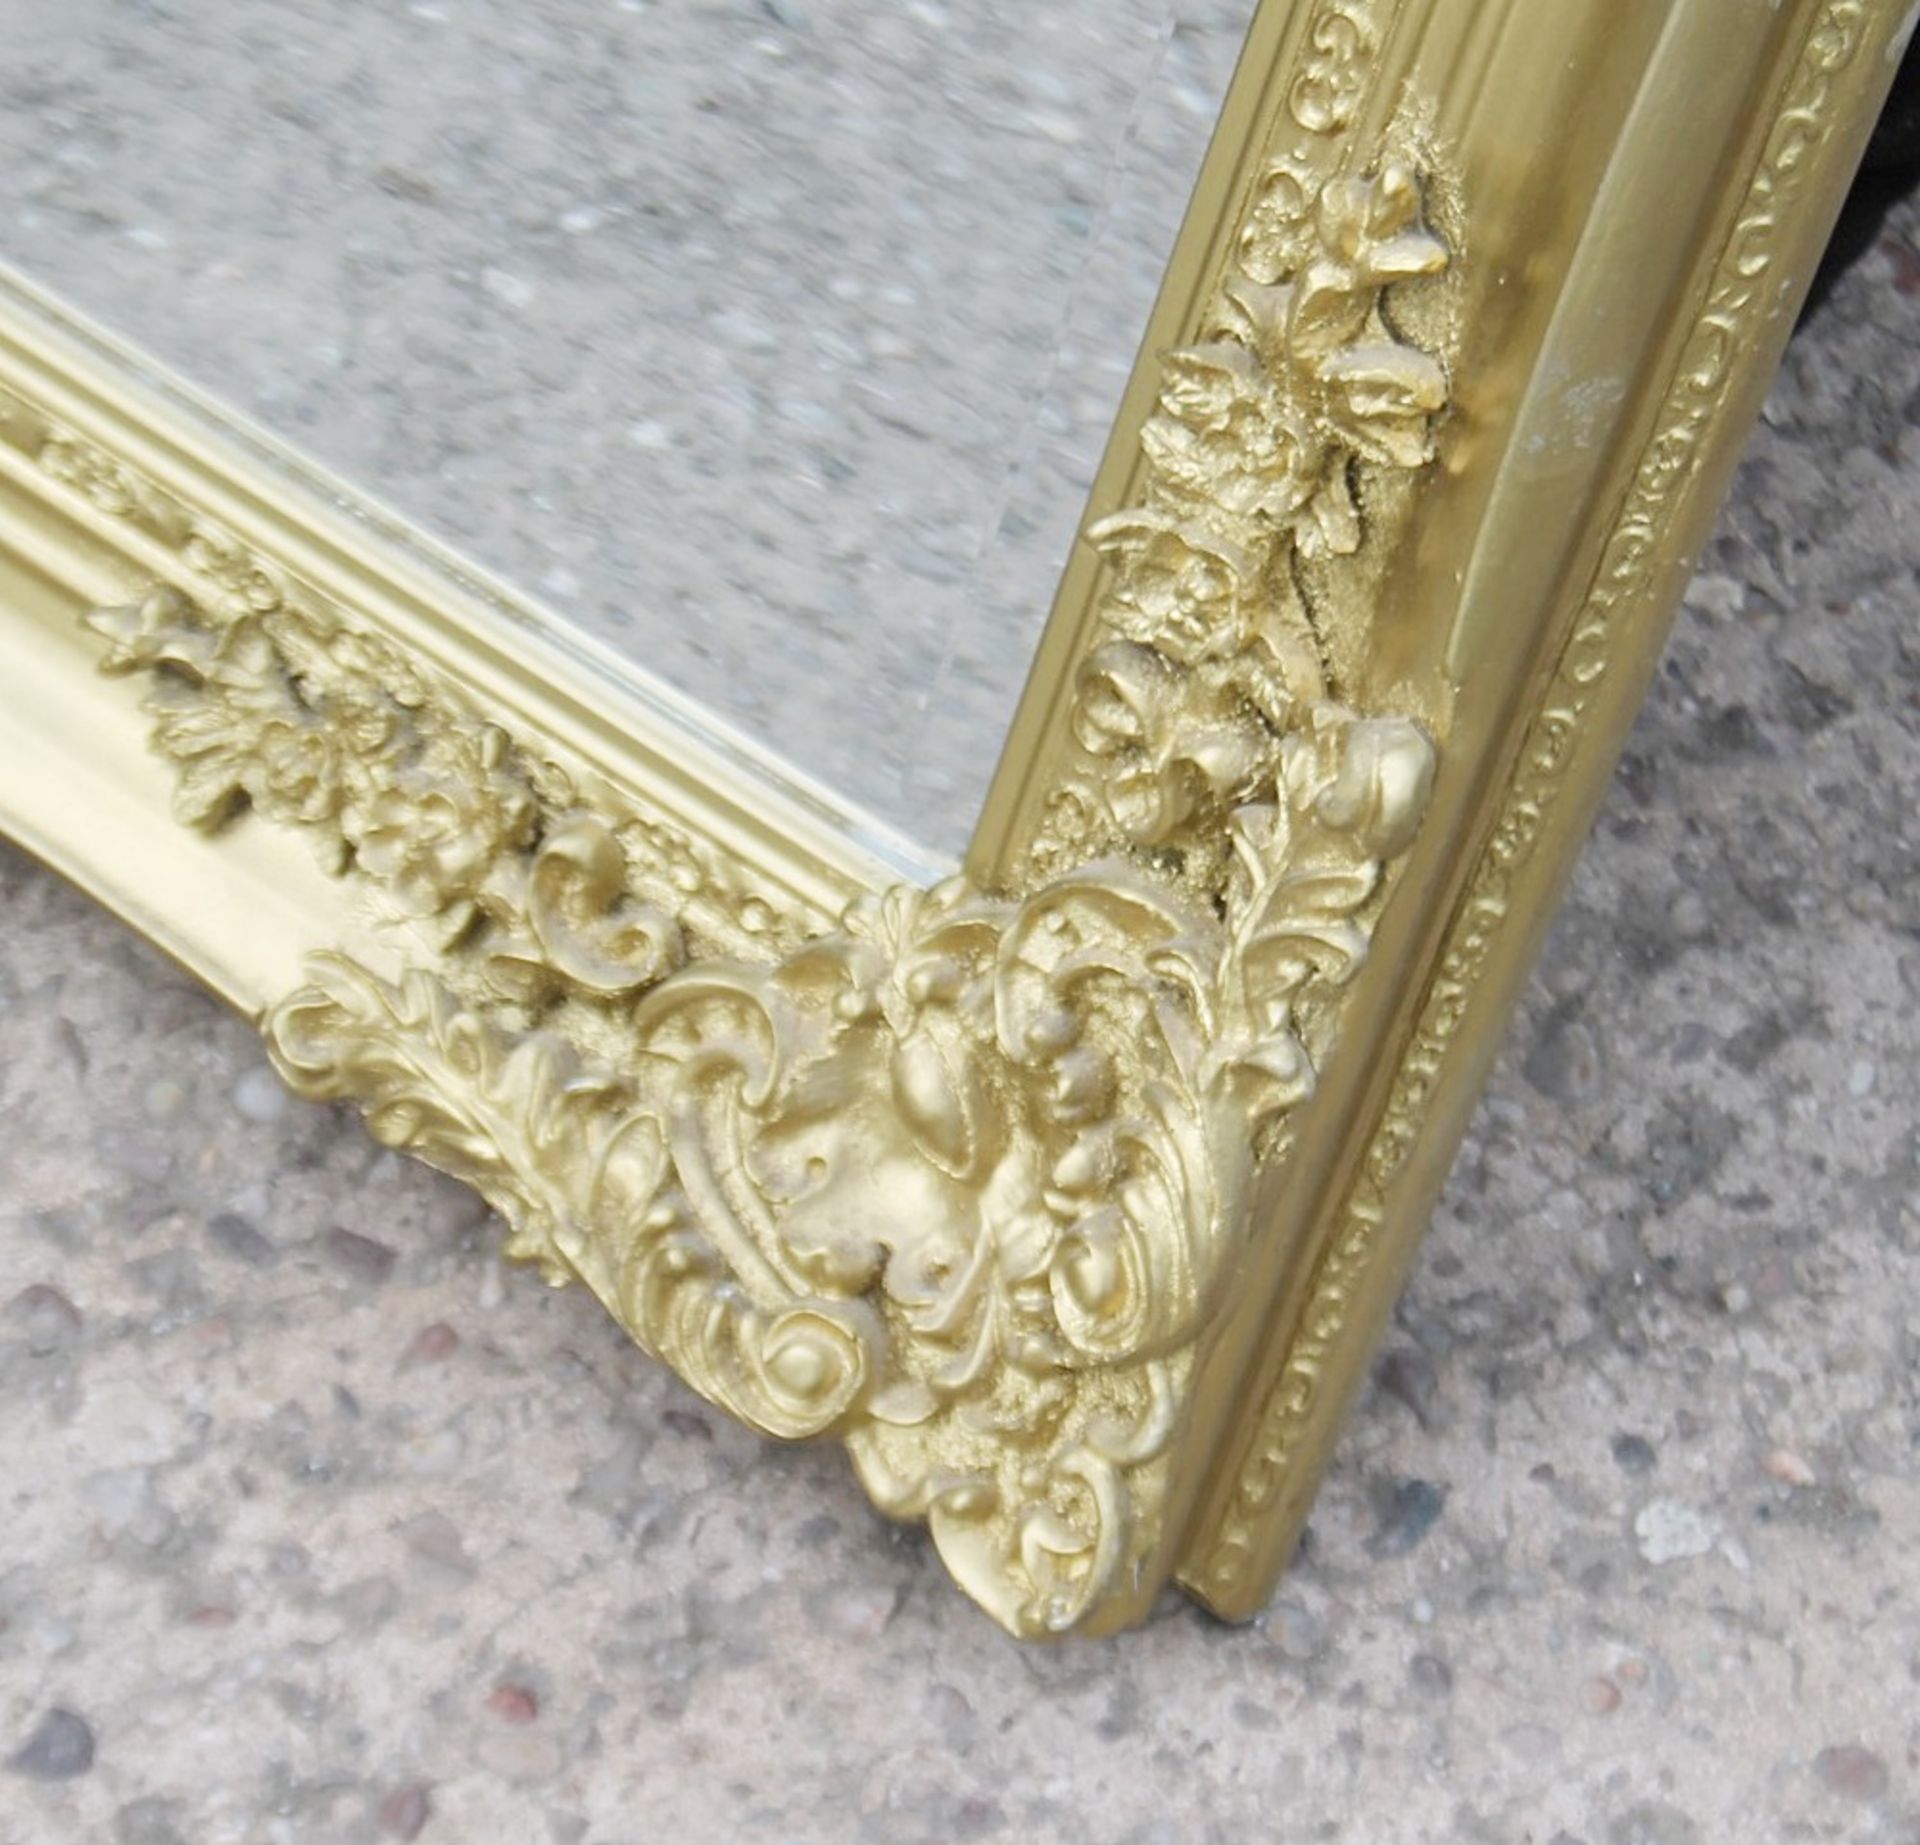 1 x Rectangular Mirror - Recently Removed From A Designer Bridal Boutique - Ref: HON158/G-IT - CL987 - Image 2 of 3